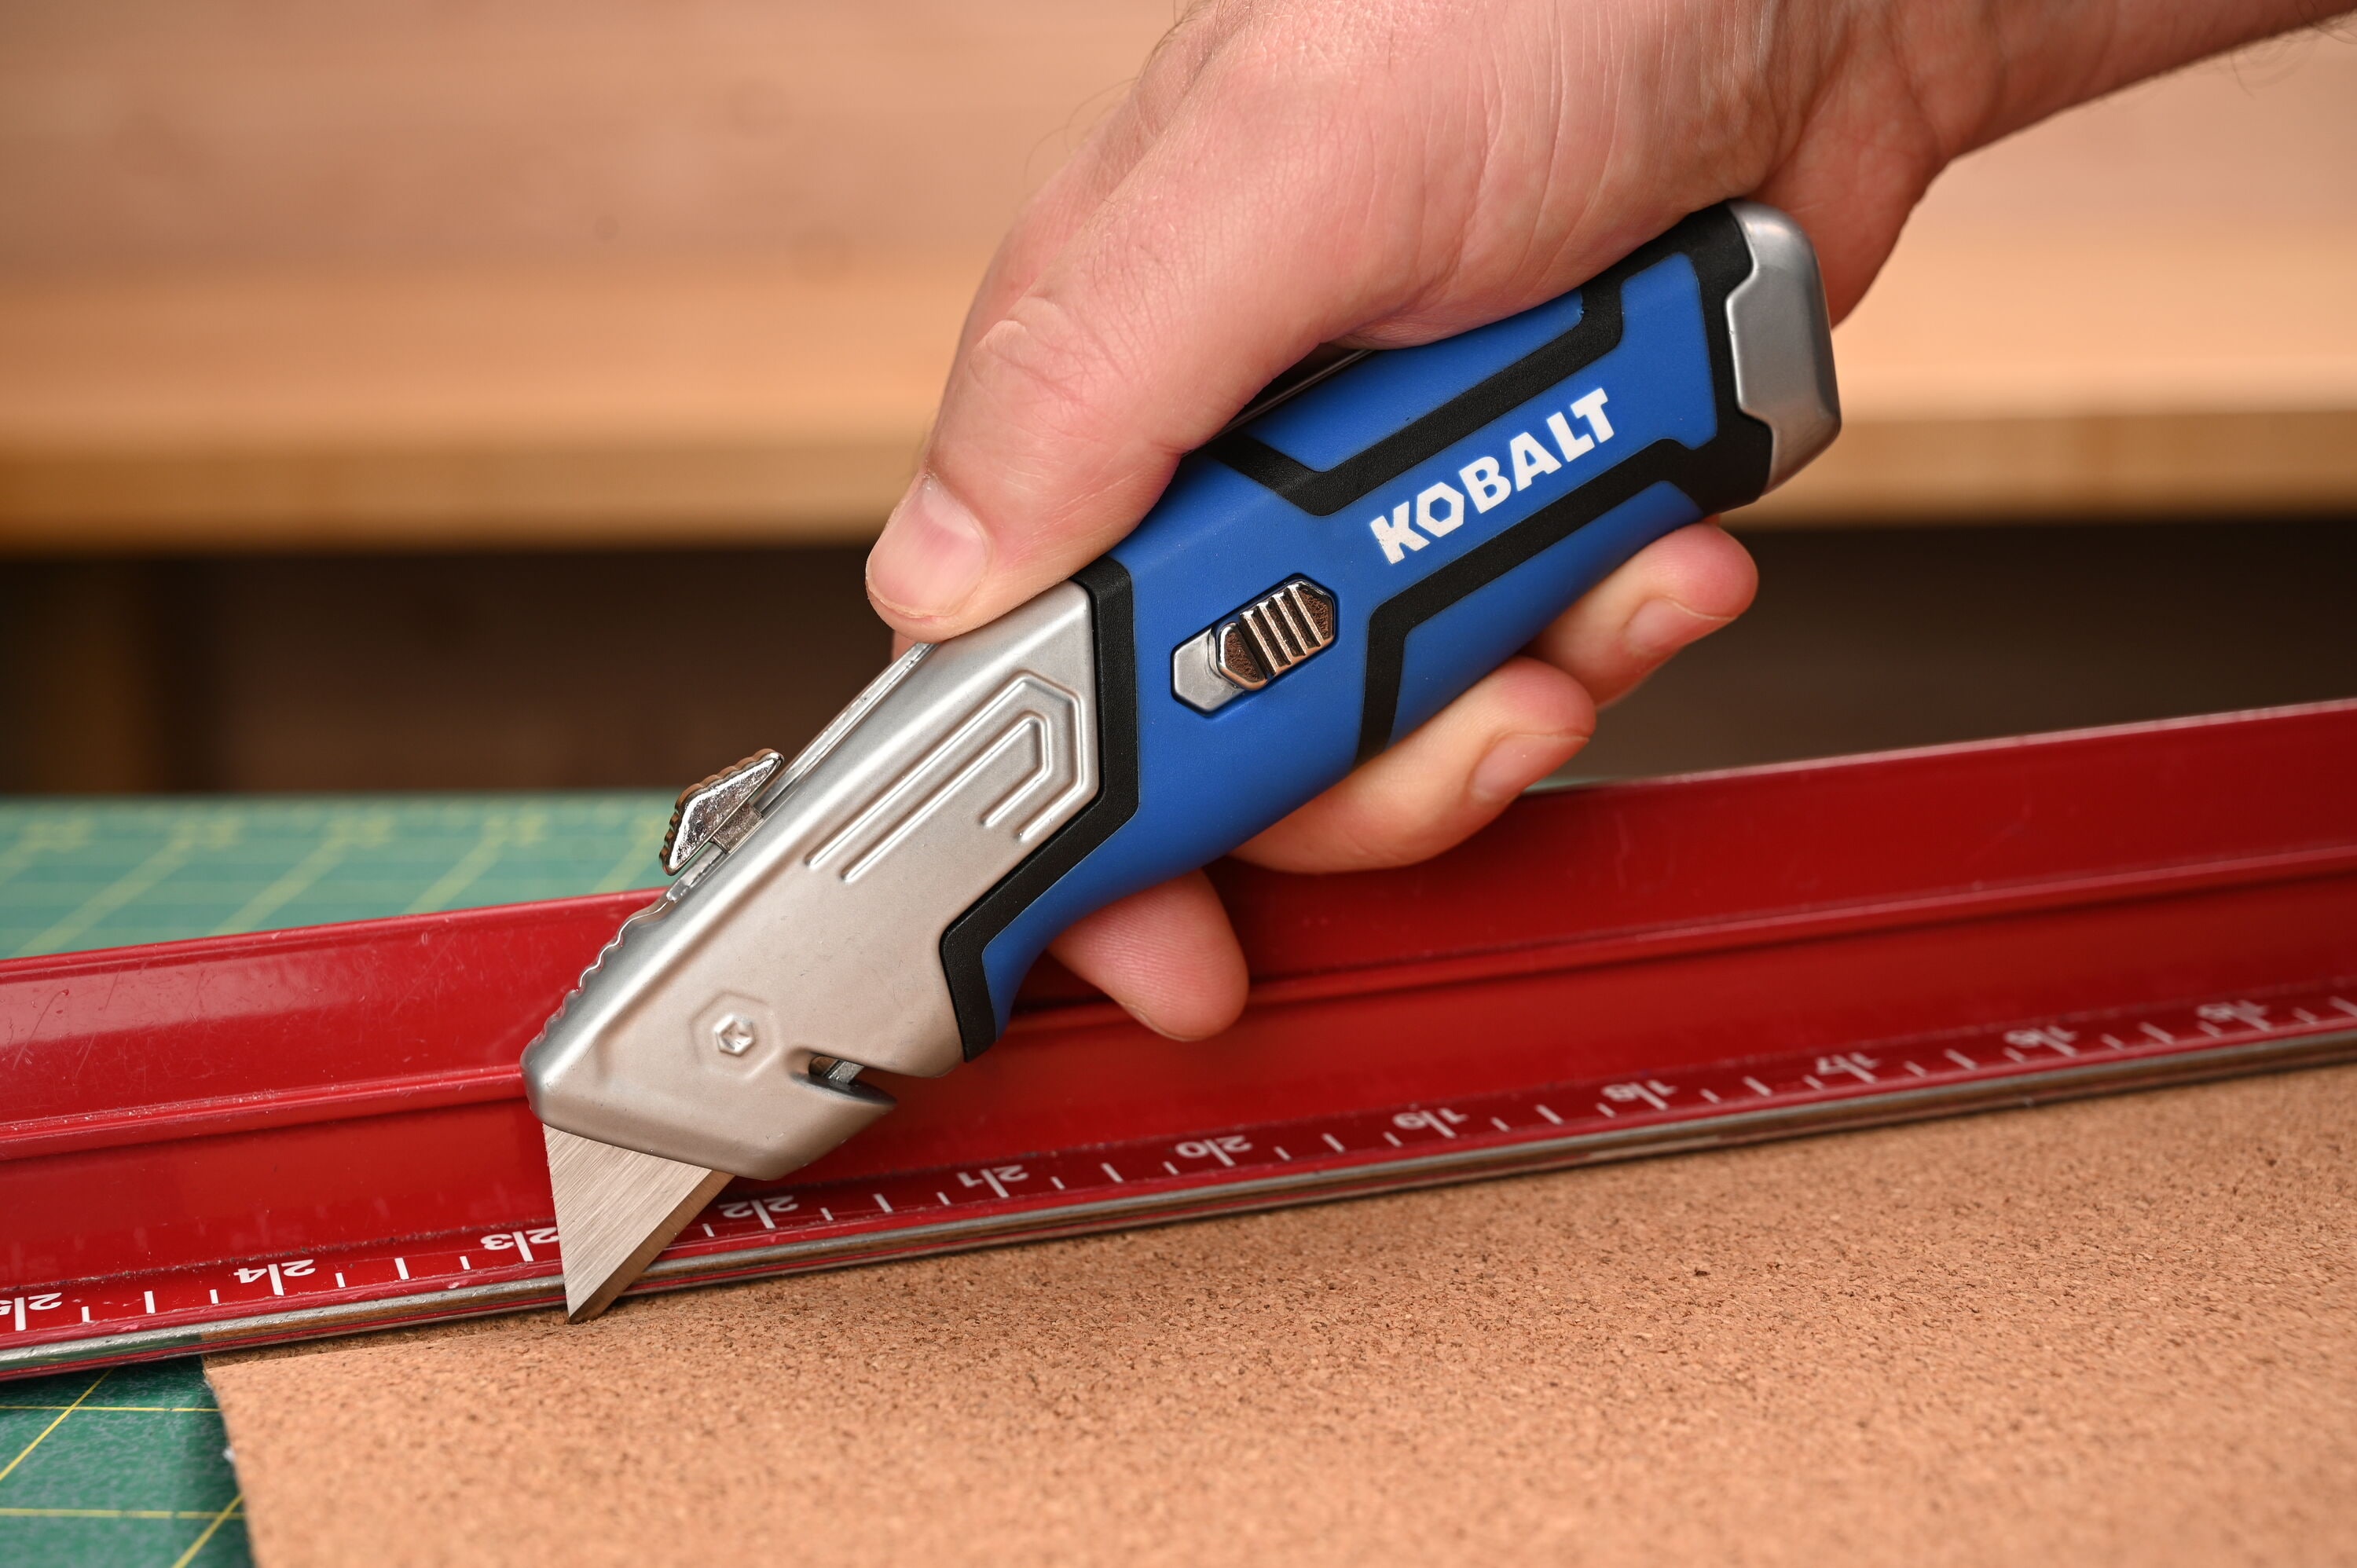 Kobalt 3/4-in 3-Blade Retractable Utility Knife with On Tool Blade Storage  in the Utility Knives department at